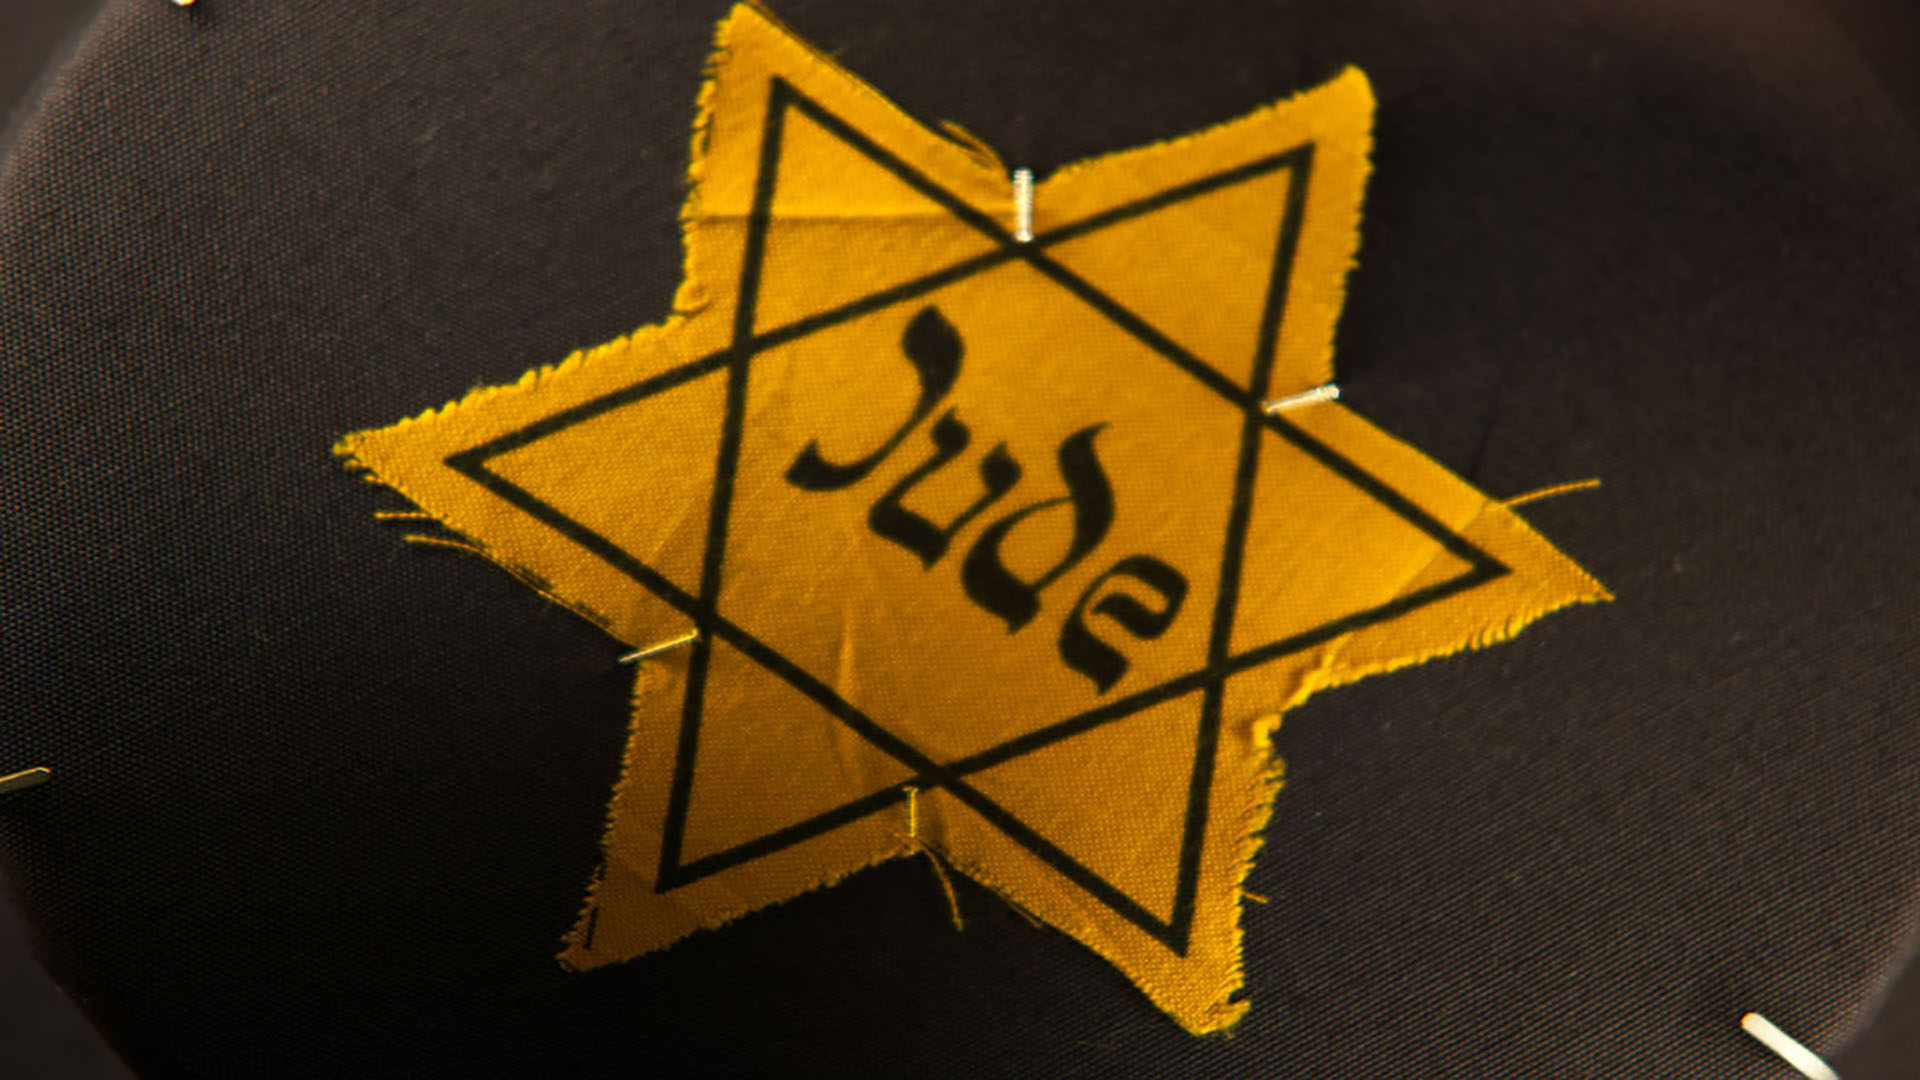 Star of david stitched onto some material